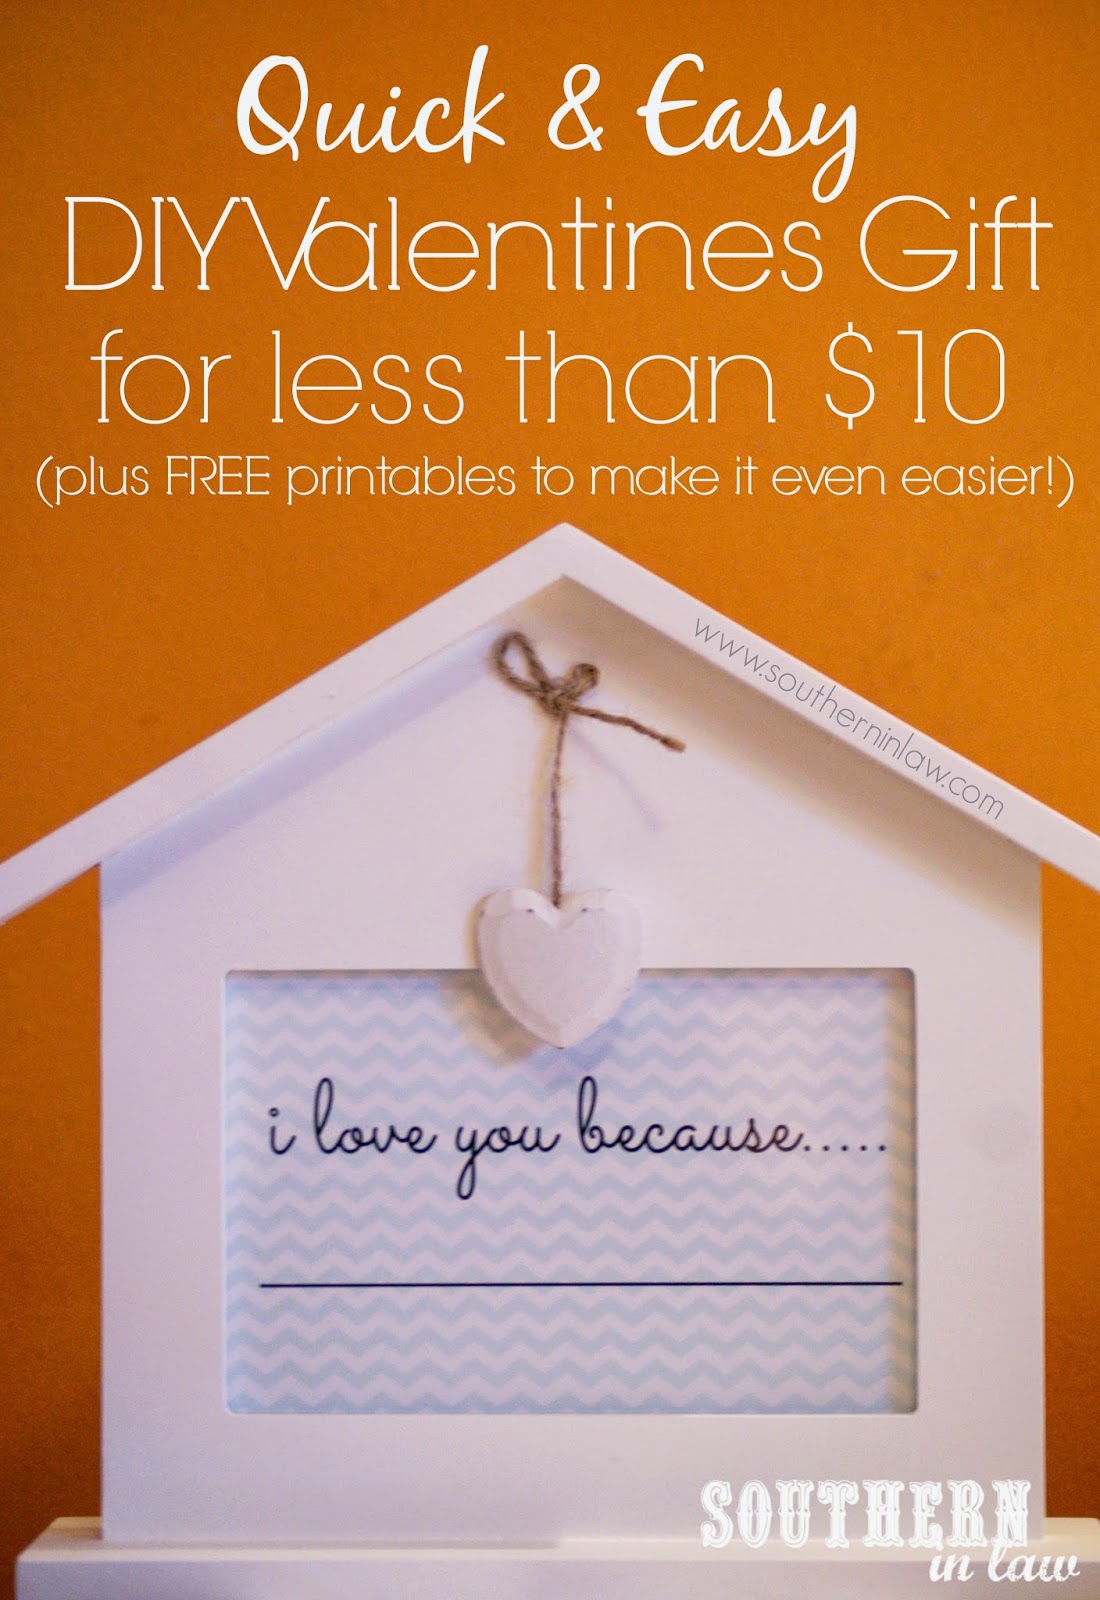 DIY Valentines Gift Ideas for less than $10  - I love you because sign